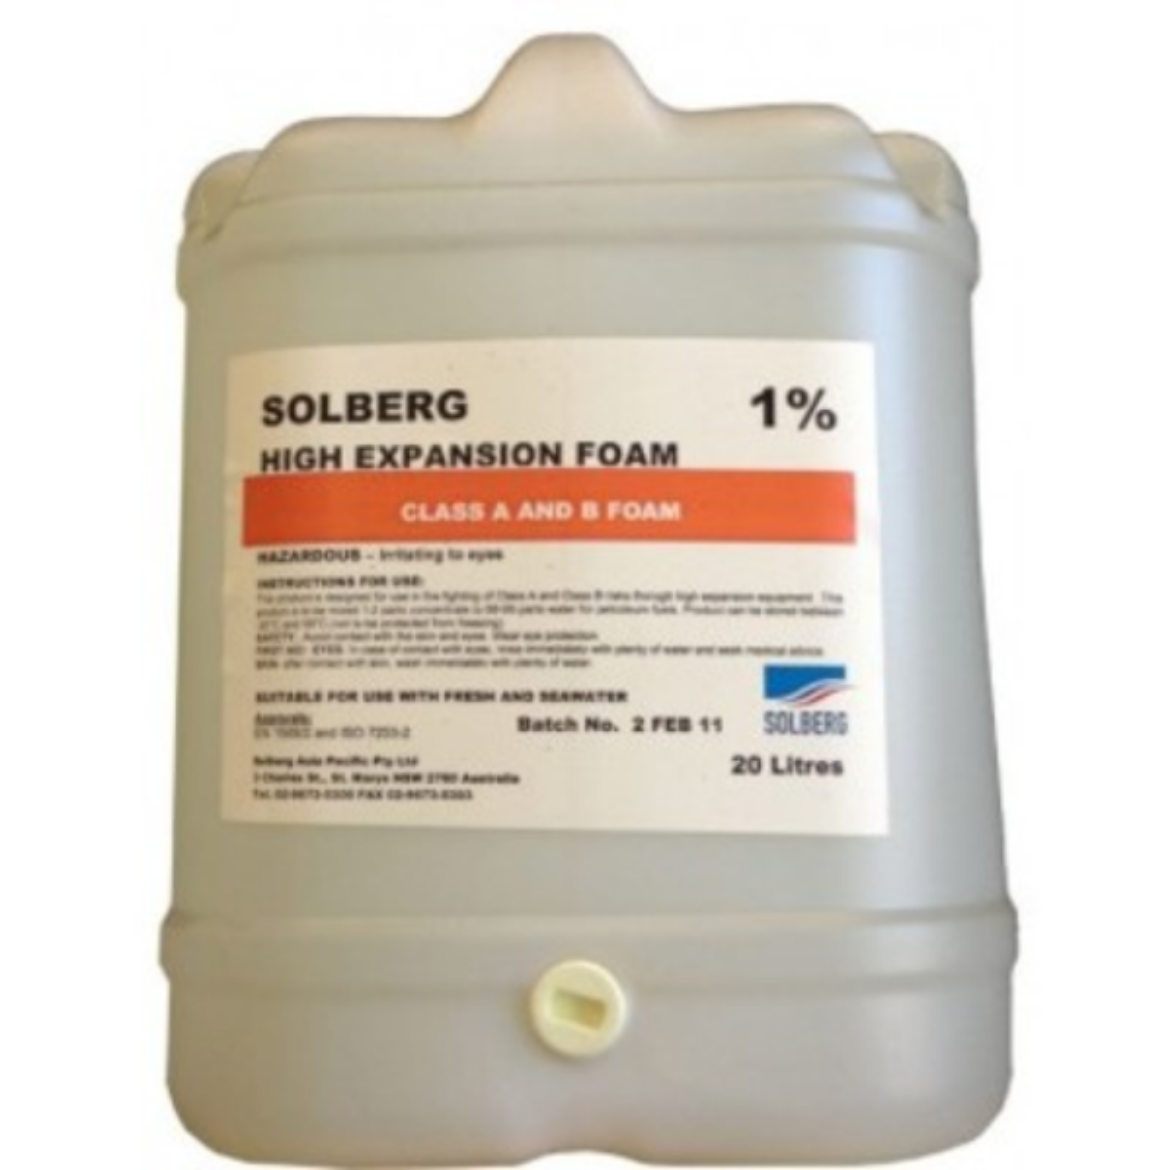 Picture of SOLBERG HIGH EXPANSION FOAM 1% - 2%, 20 LITRE PAIL